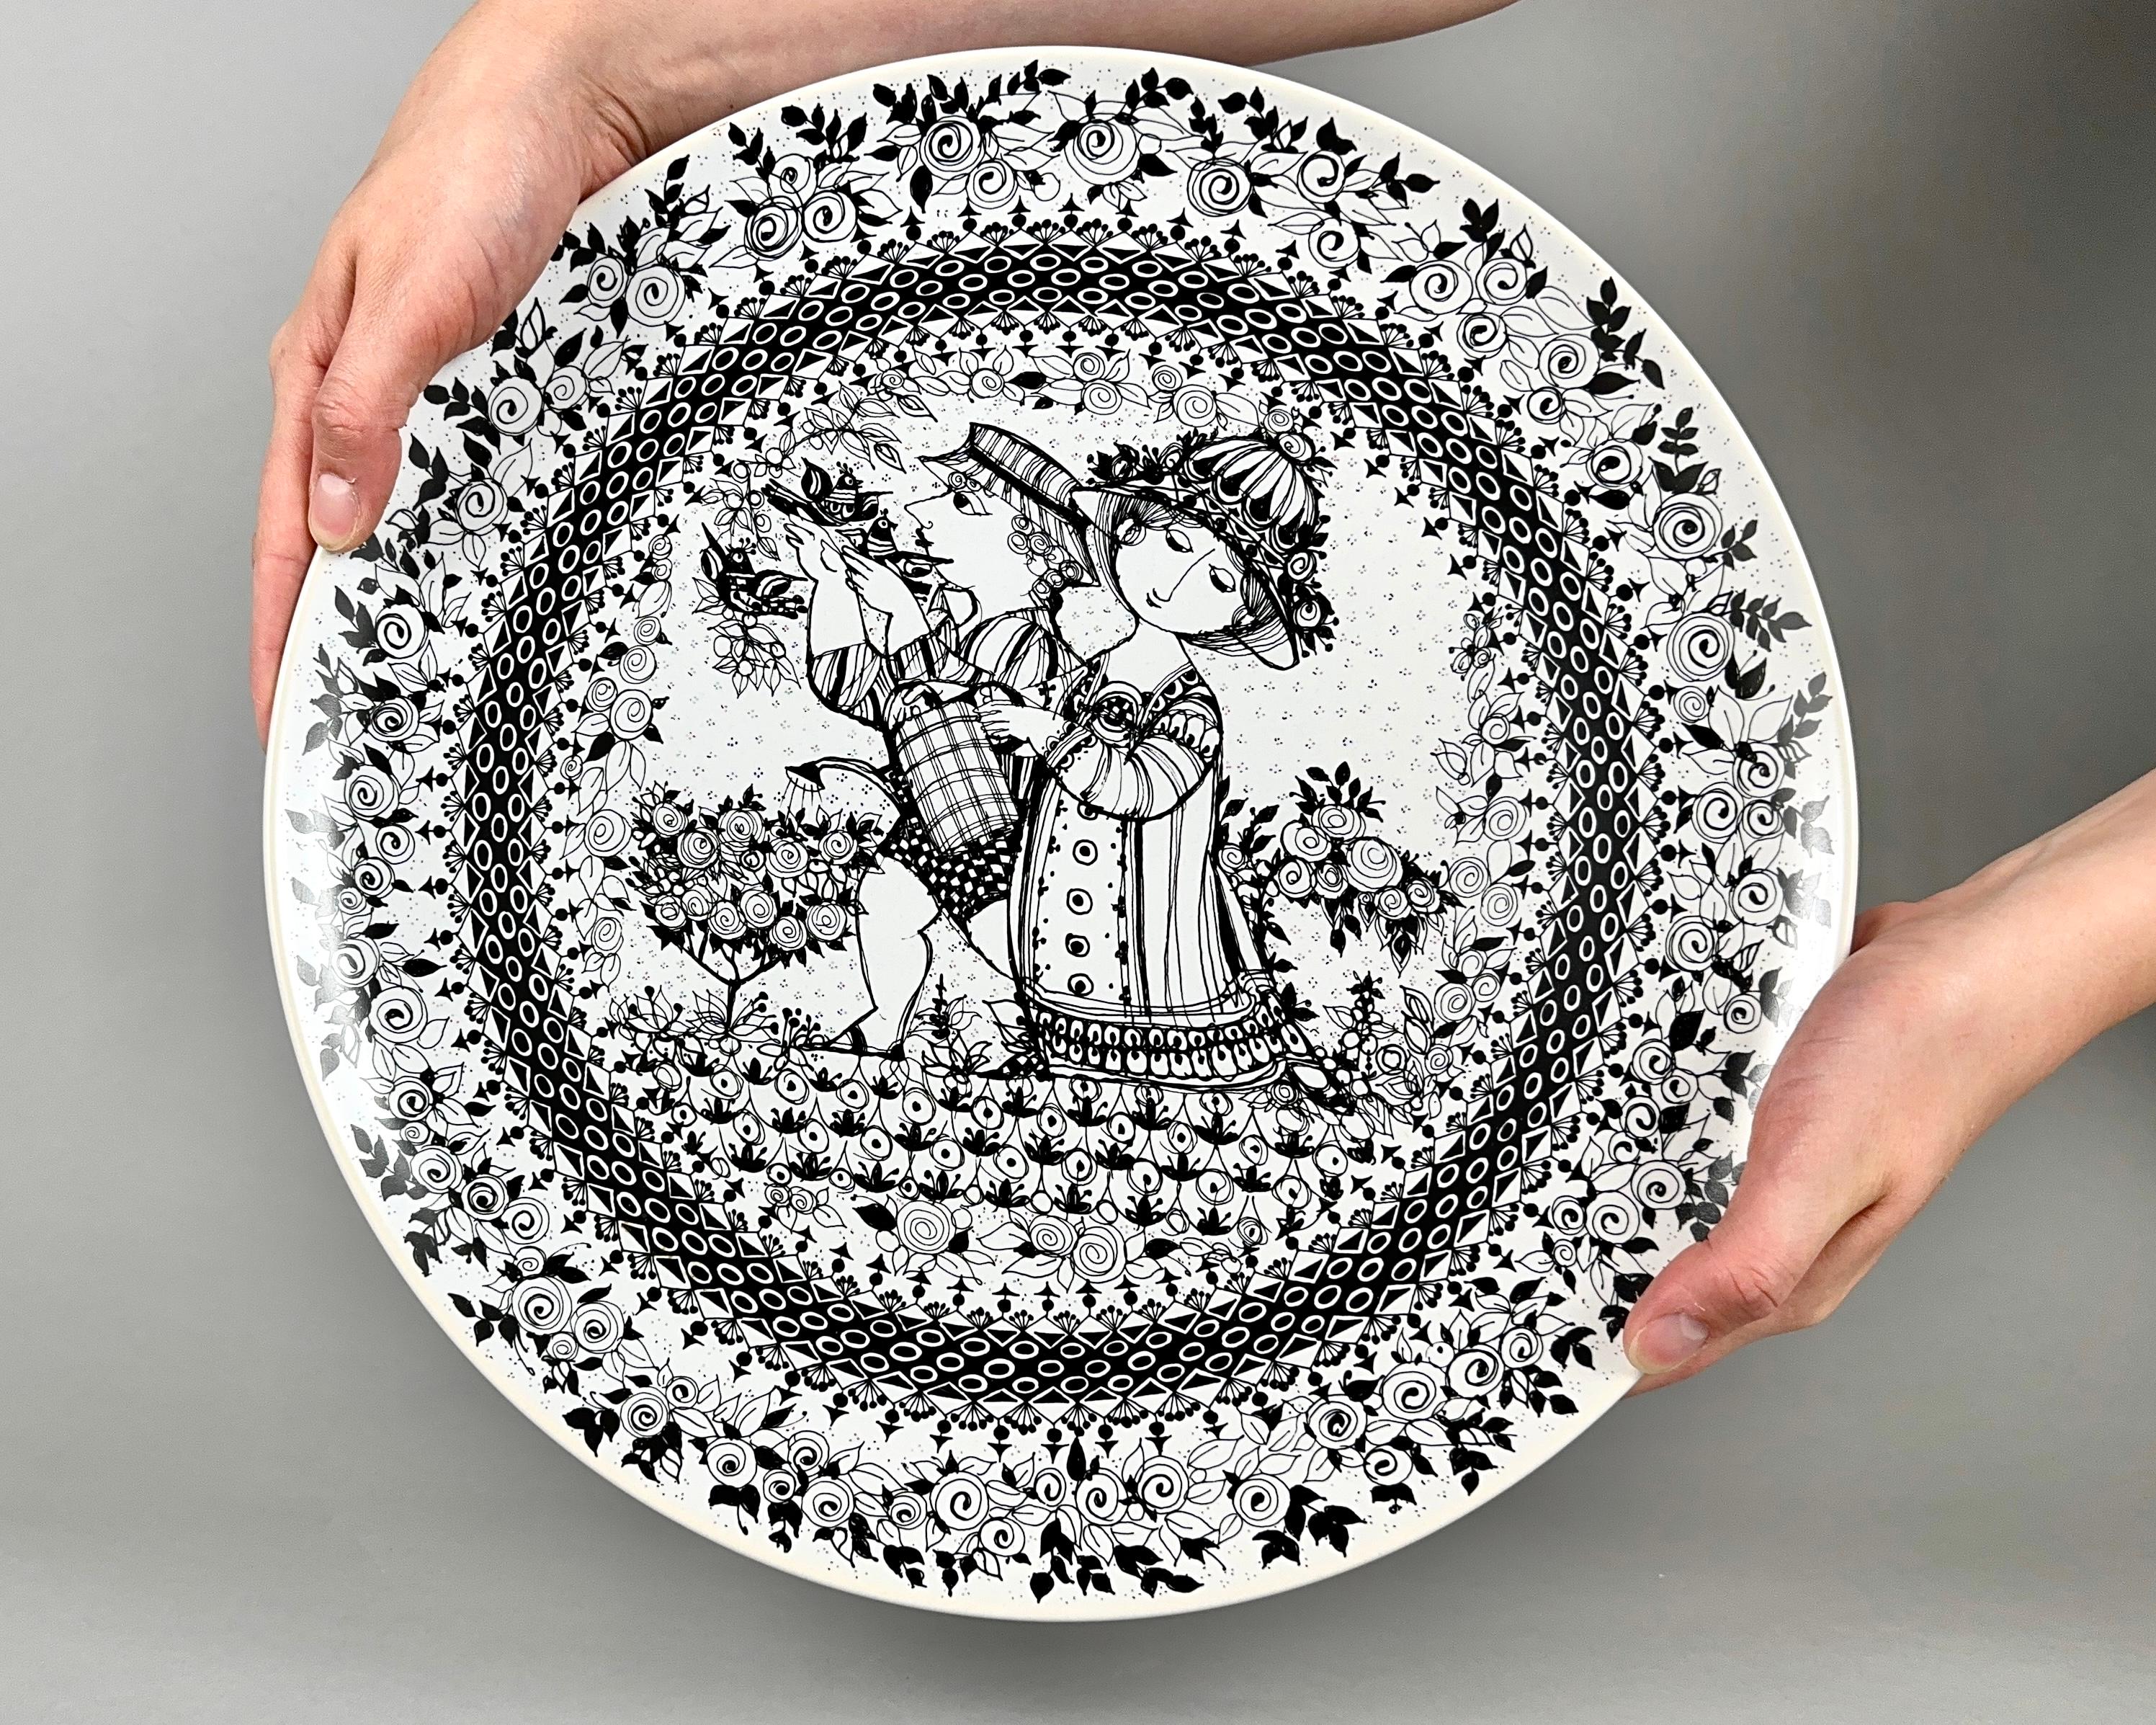 Vintage wall plate “The Seasons” “Summer” by  ROSENTHAL Germany Studio-Line.

Limited edtion designed by Bjorn Wiinblad.

Brilliant colours, very impressive! 

Gorgeous plate that will fit into any interior with dignity!

It will be very beneficial